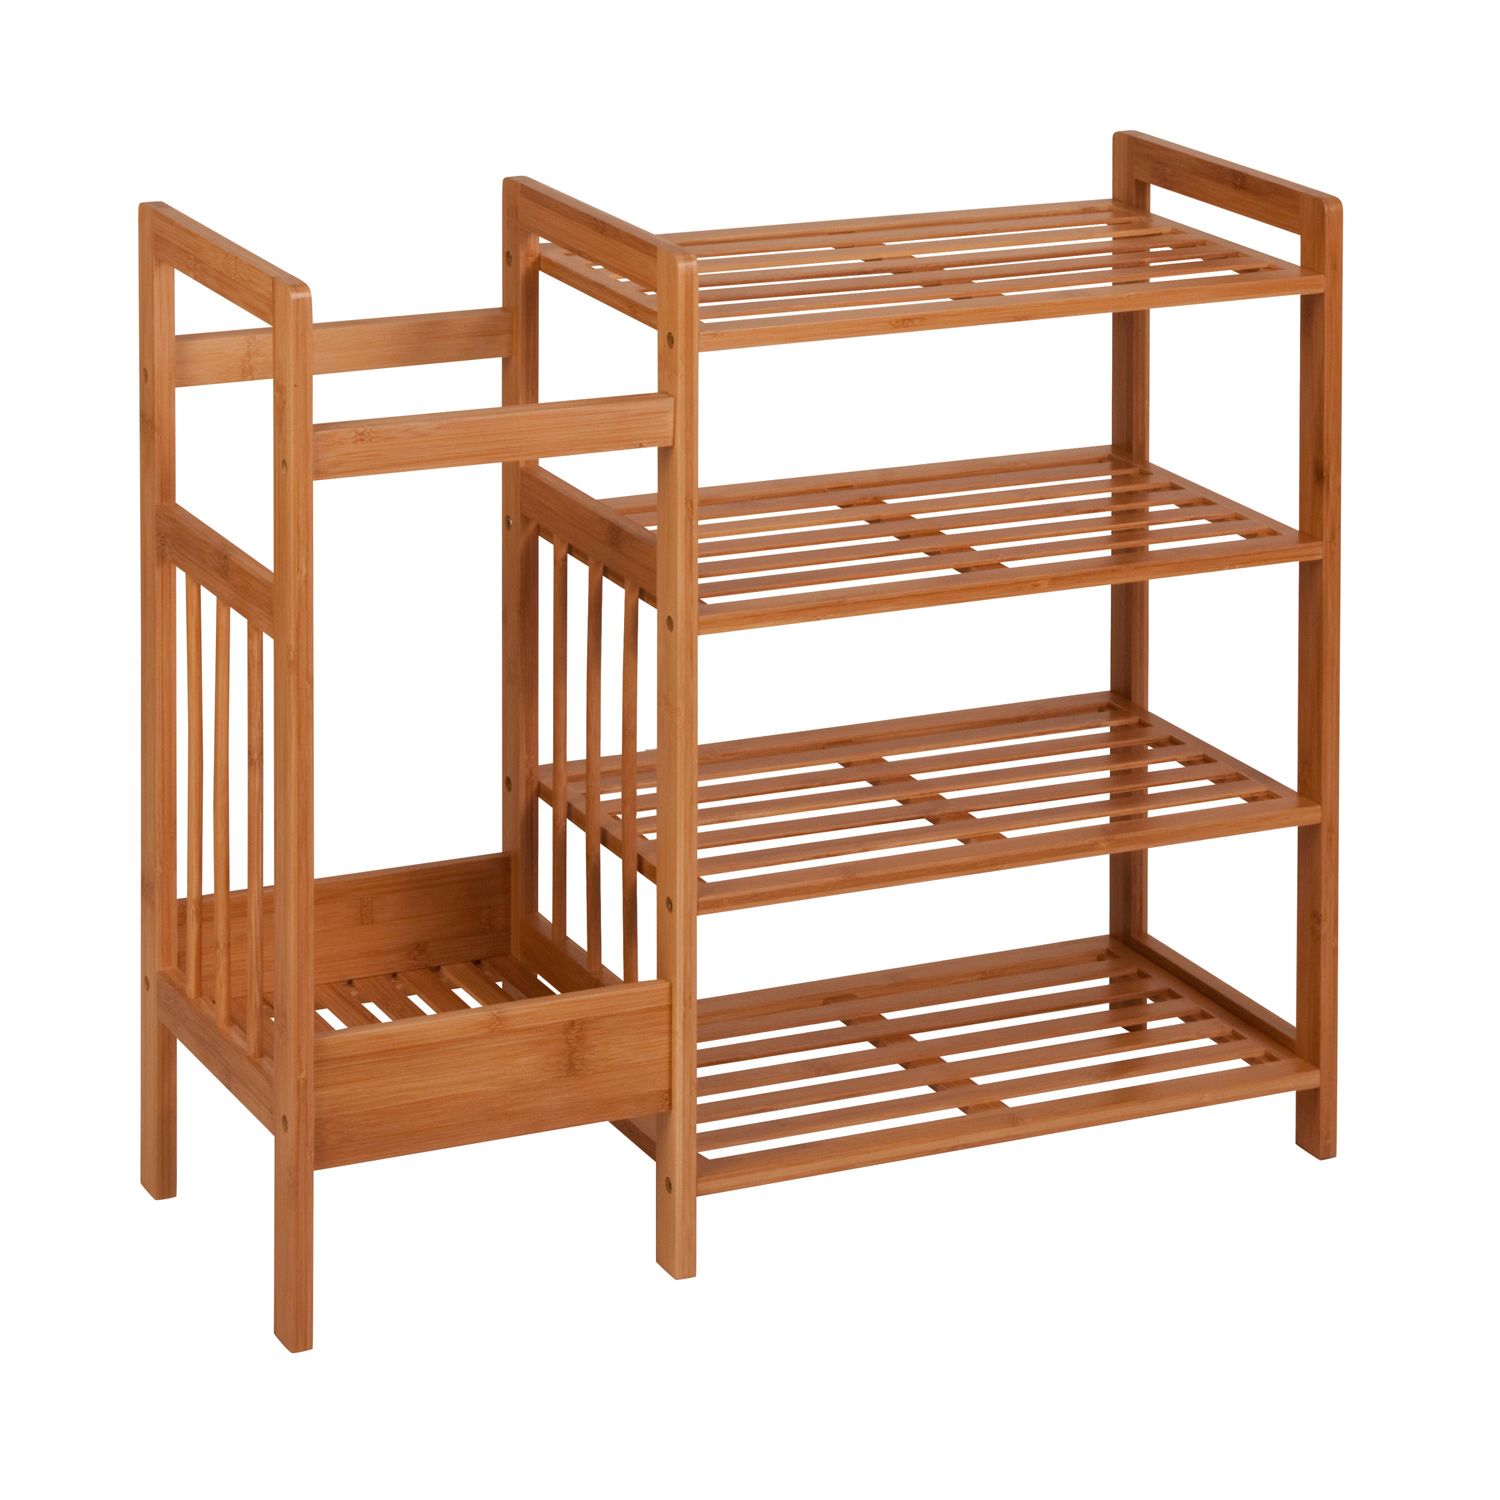 Image for Honey-Can-Do Bamboo Entryway Organizer at Kohl's.